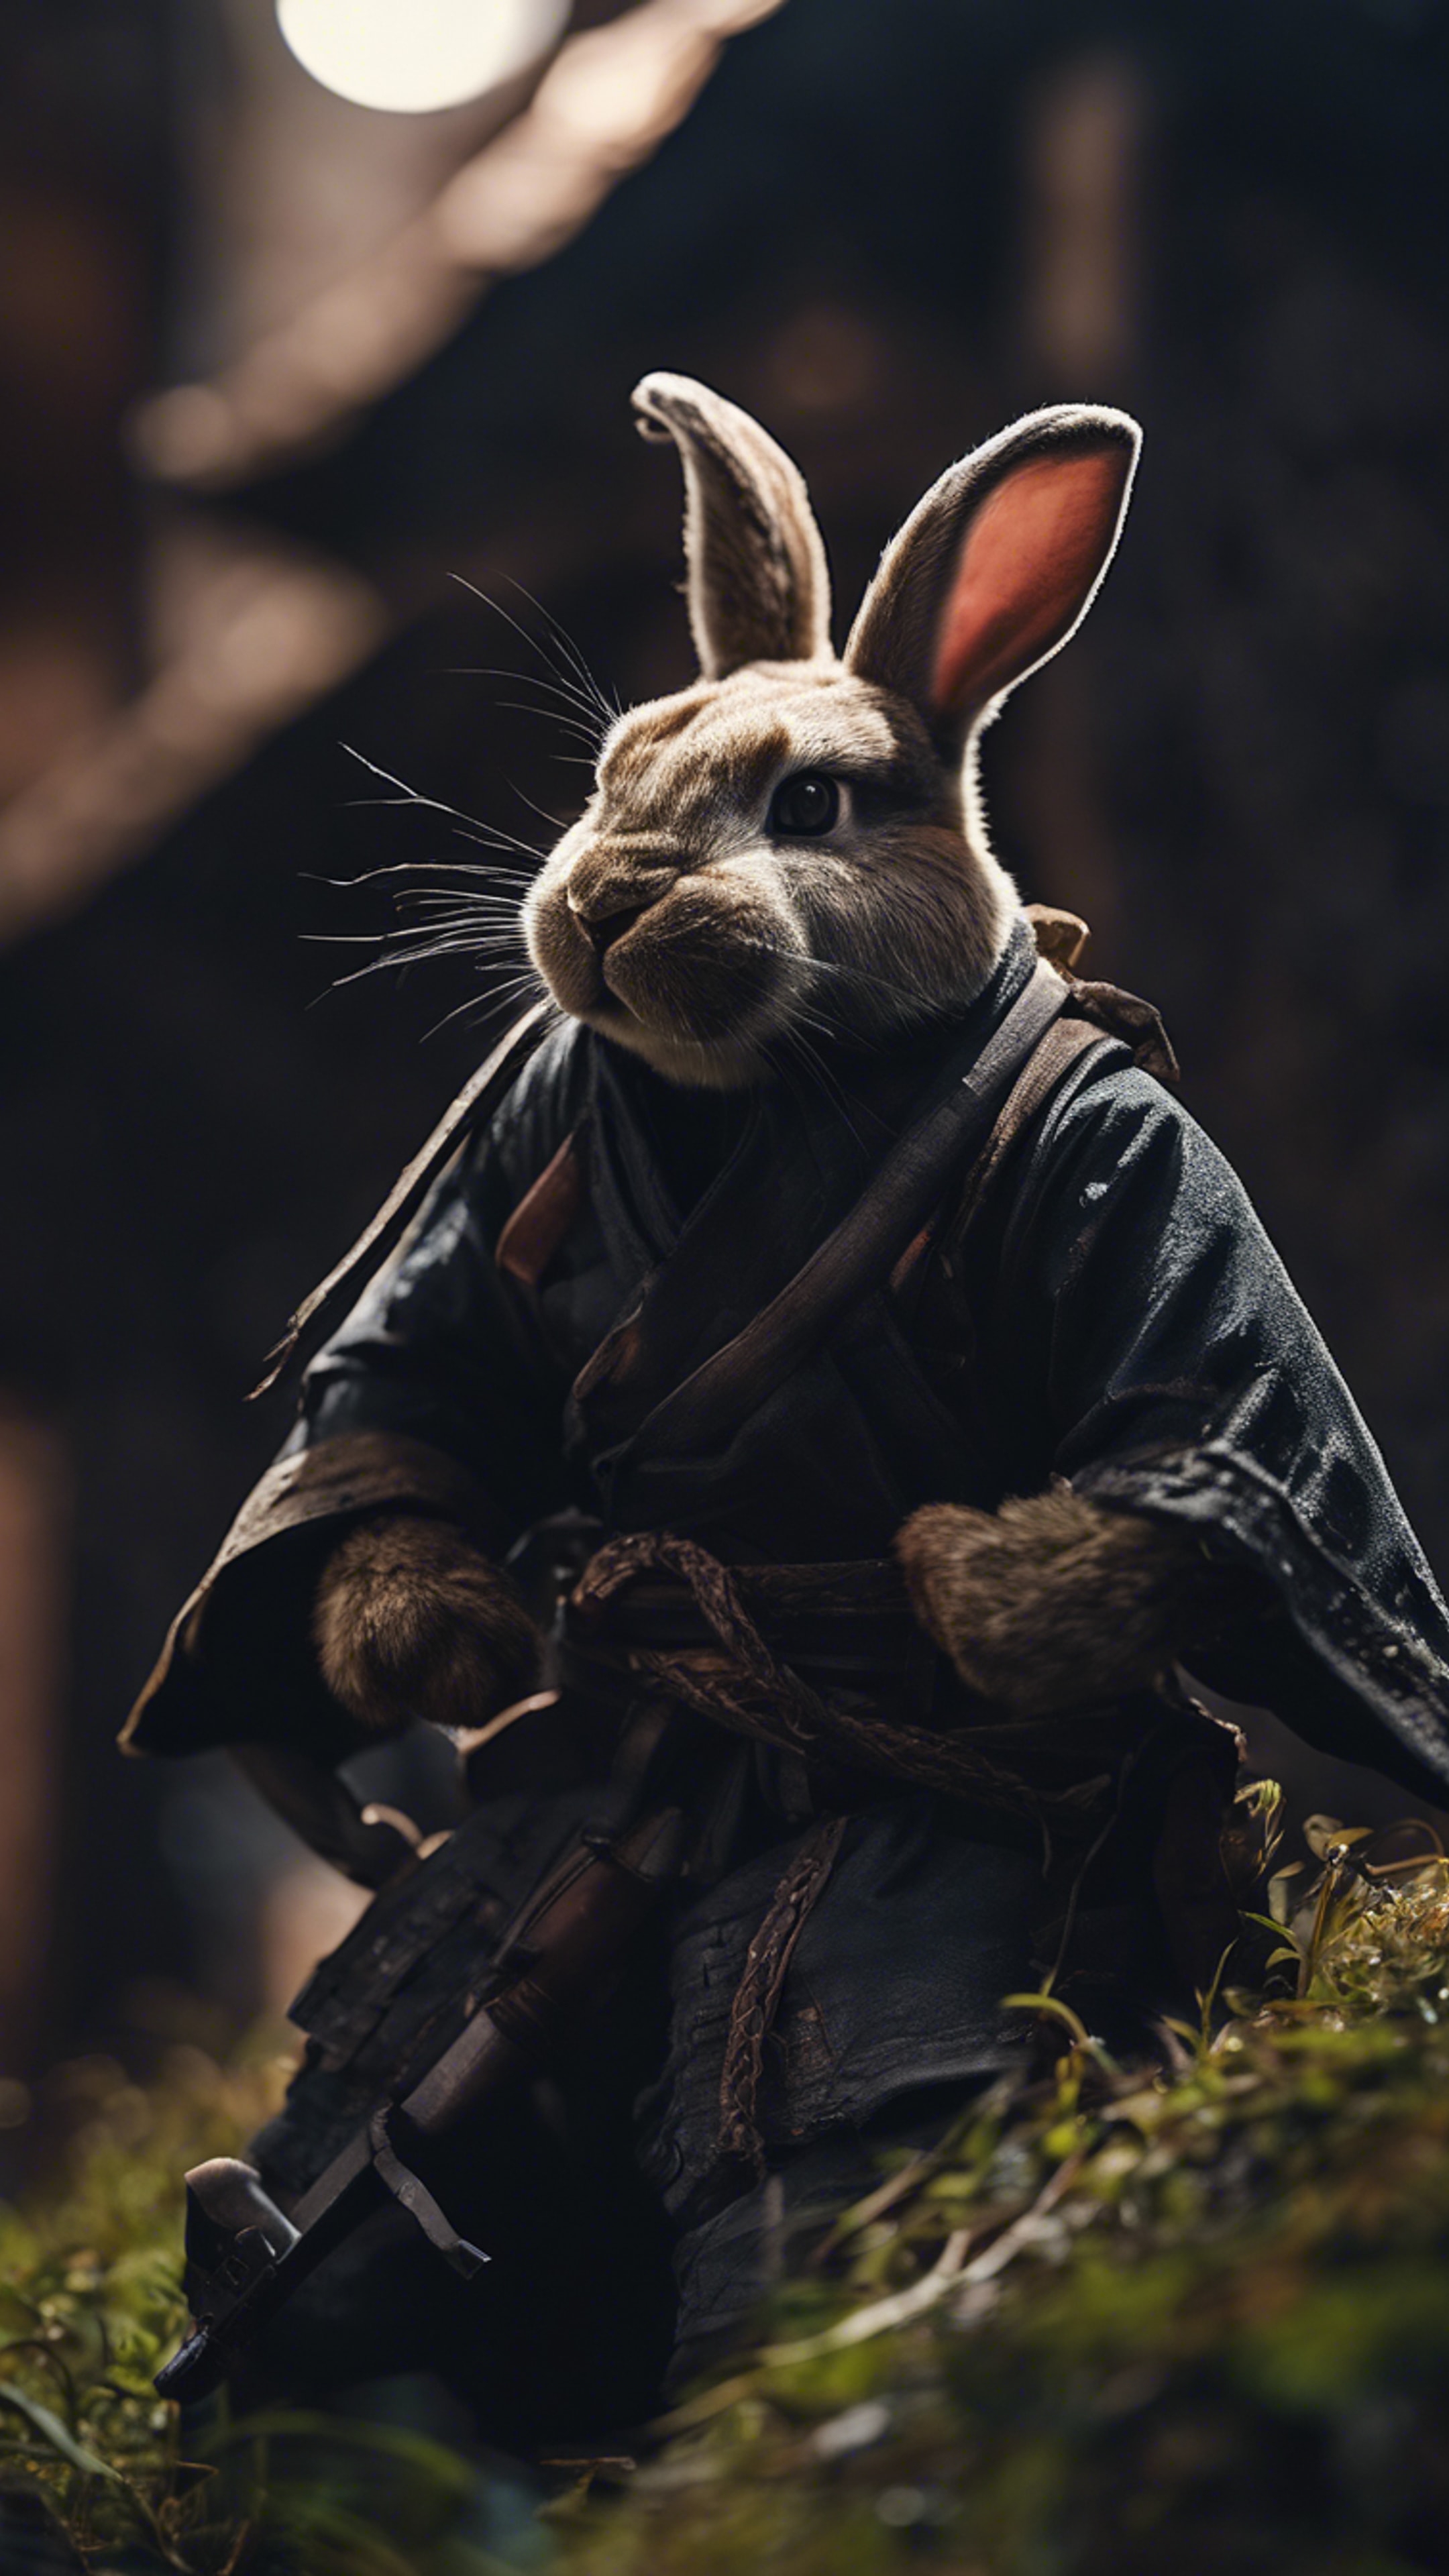 A rabbit ninja stealthily infiltrating a fortress under the cover of darkness. Wallpaper[6531f33b70ff4f28bd8a]